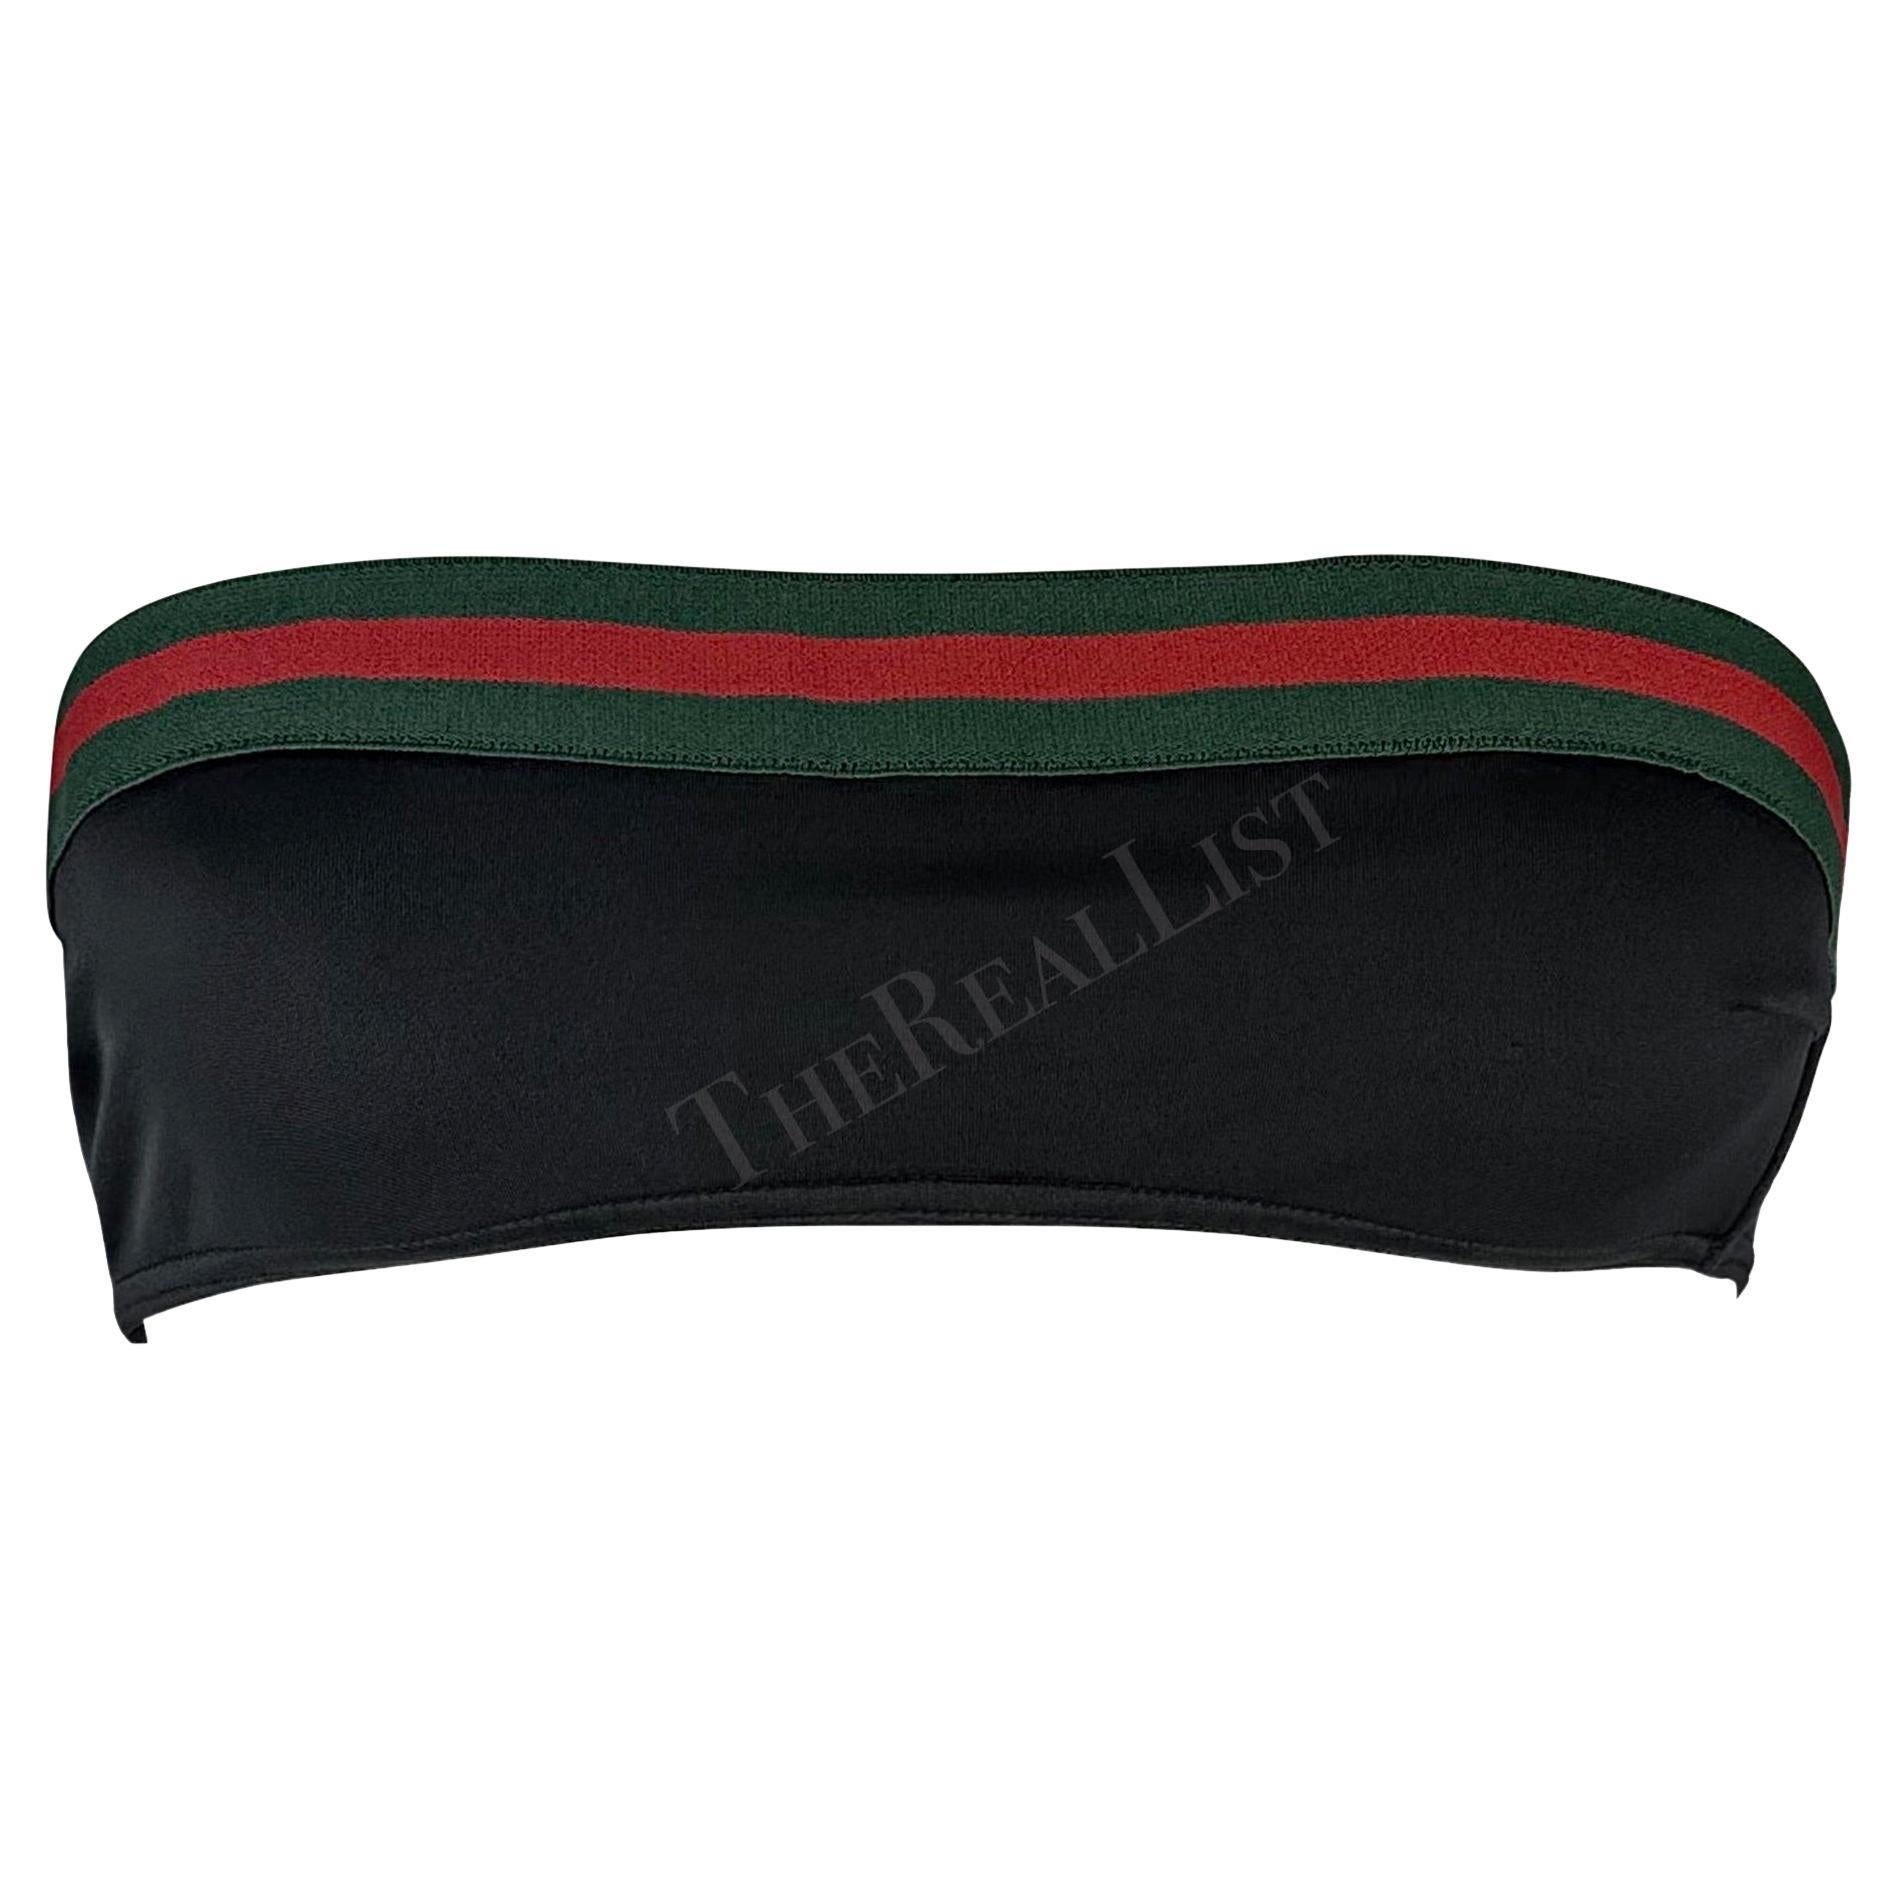 Presenting a black Gucci swim tube top, designed by Tom Ford. From the Spring/Summer 1999 collection, this chic strapless bikini top features the classic green and red Gucci striped webbing that wraps around the top and is made complete with a black